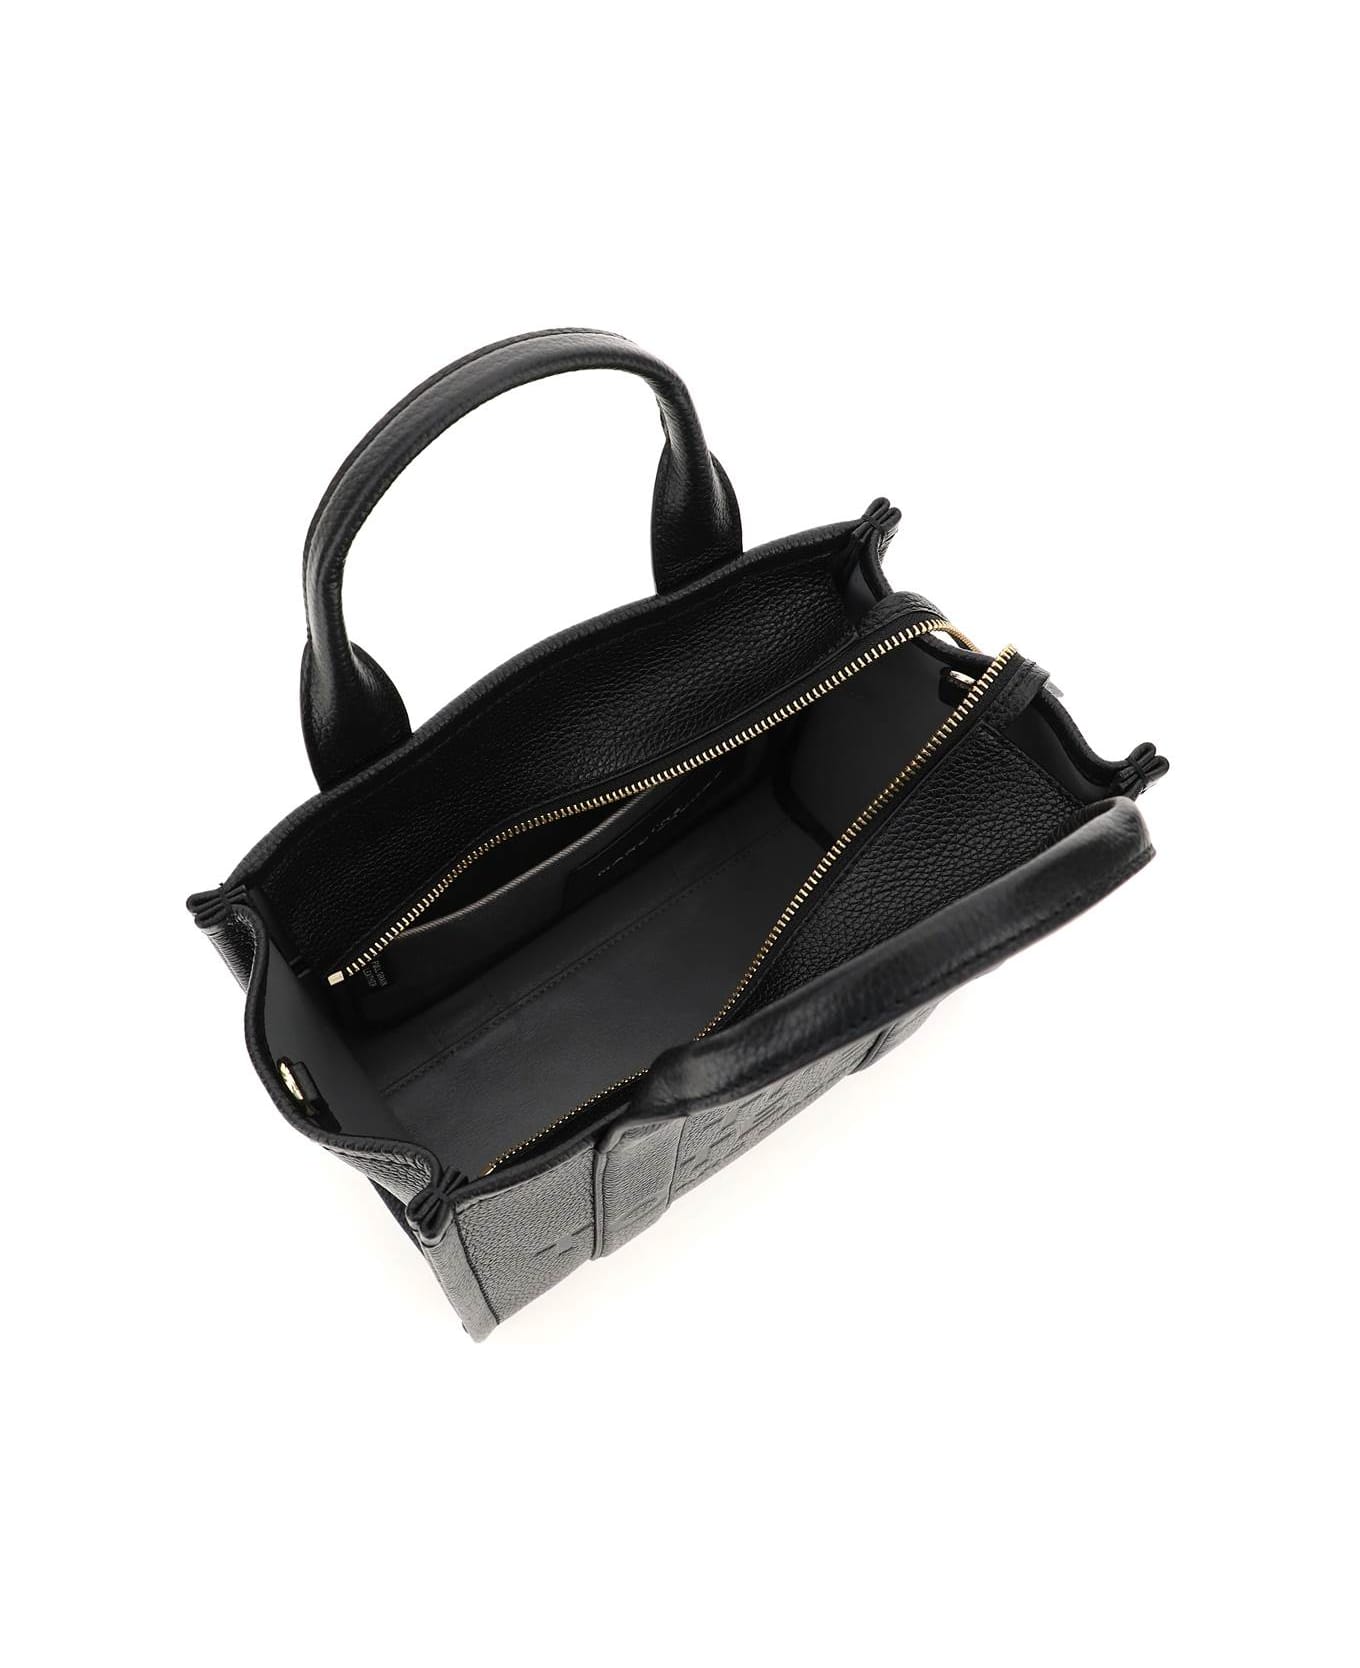 Marc Jacobs The Leather Small Tote Bag - BLACK (Black) トートバッグ